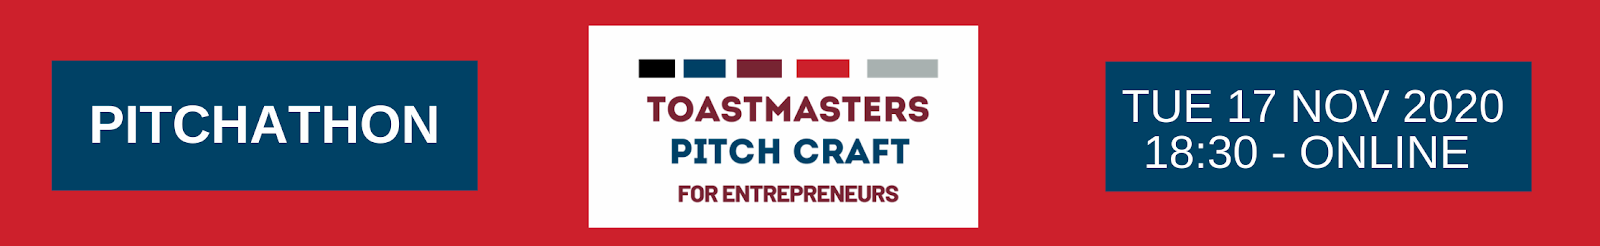 Pitch Craft for Entrepreneurs Toastmasters Club